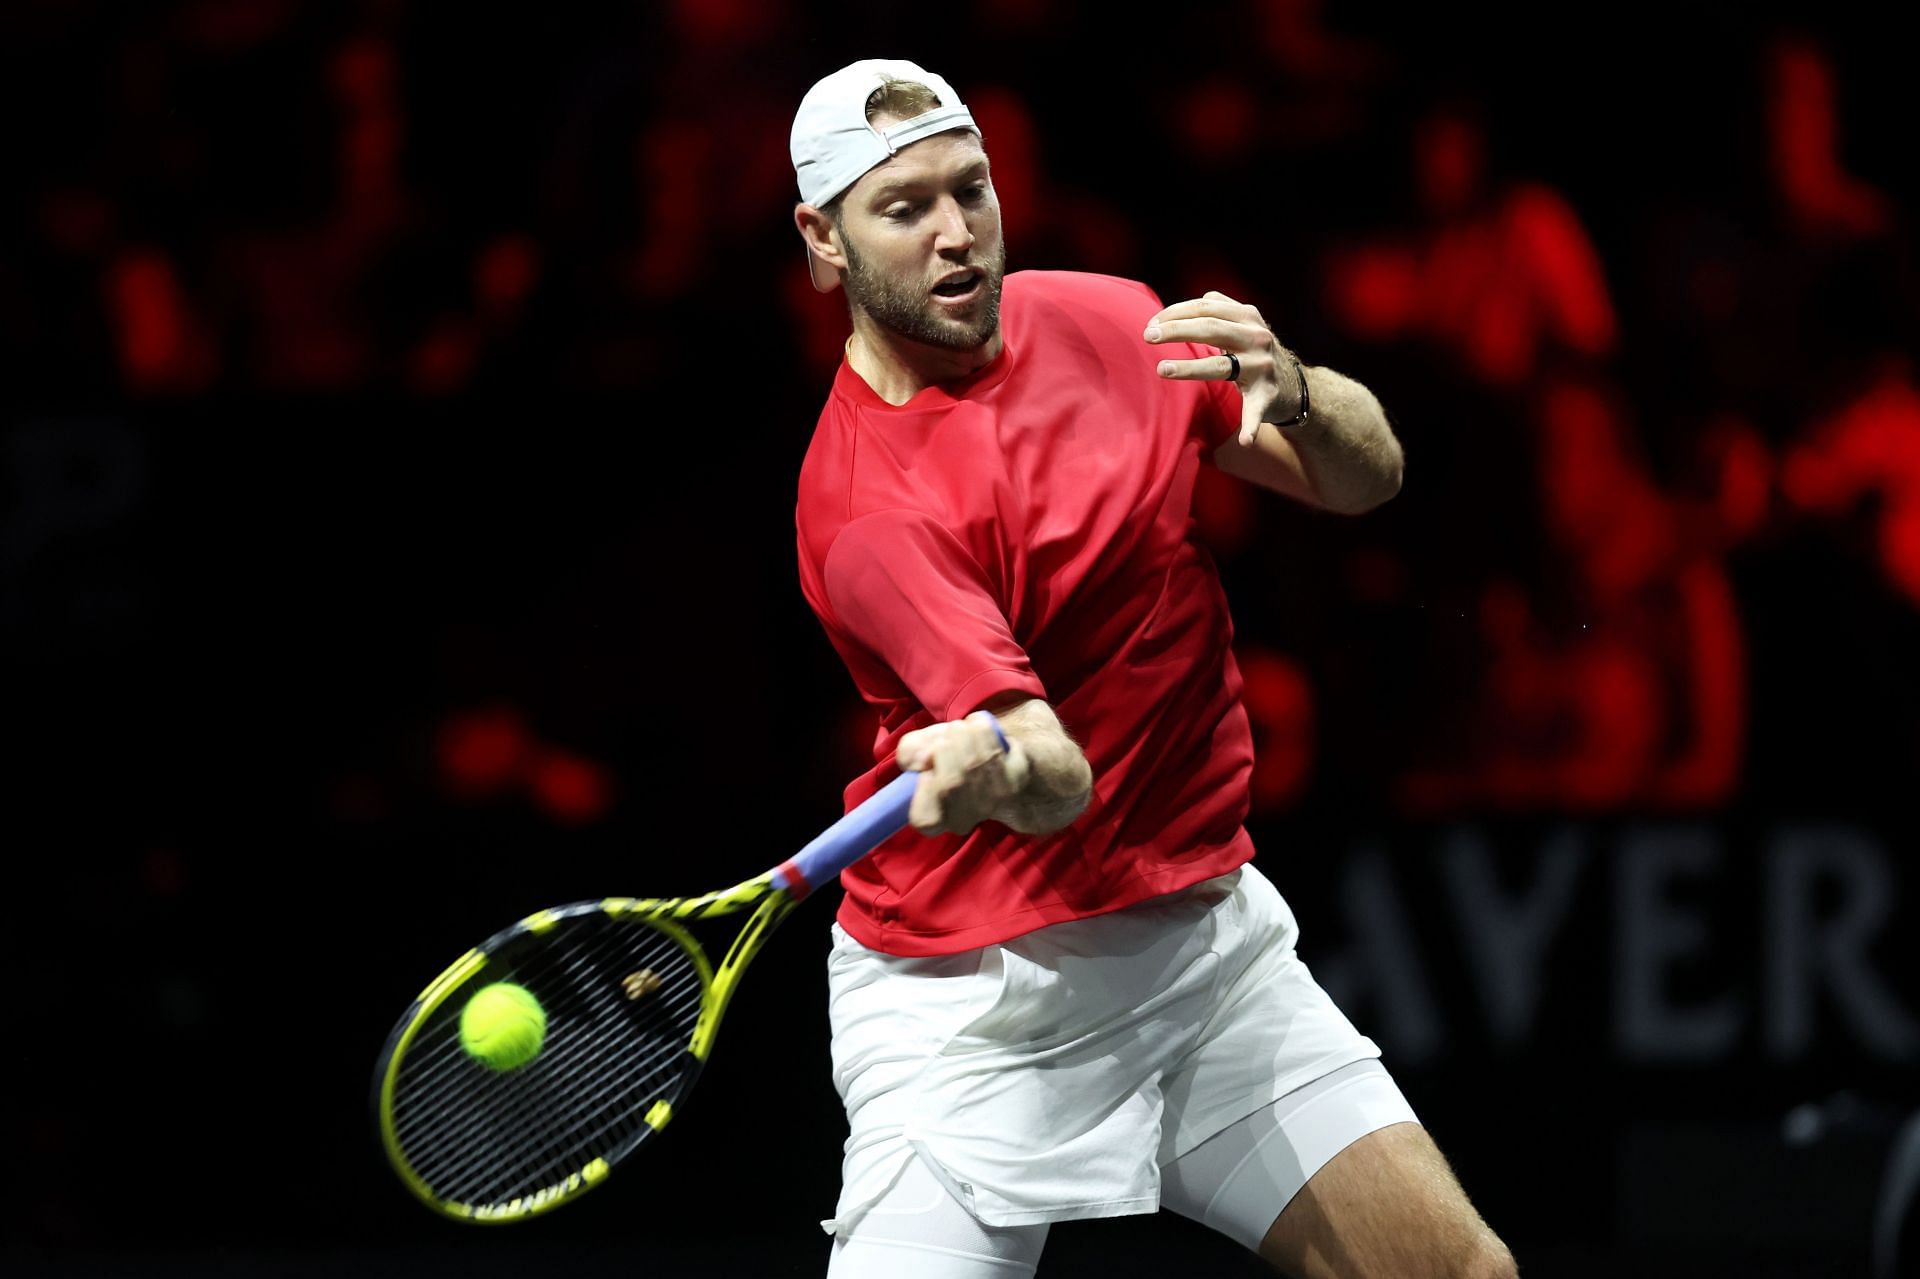 Jack sock at the Laver Cup 2022